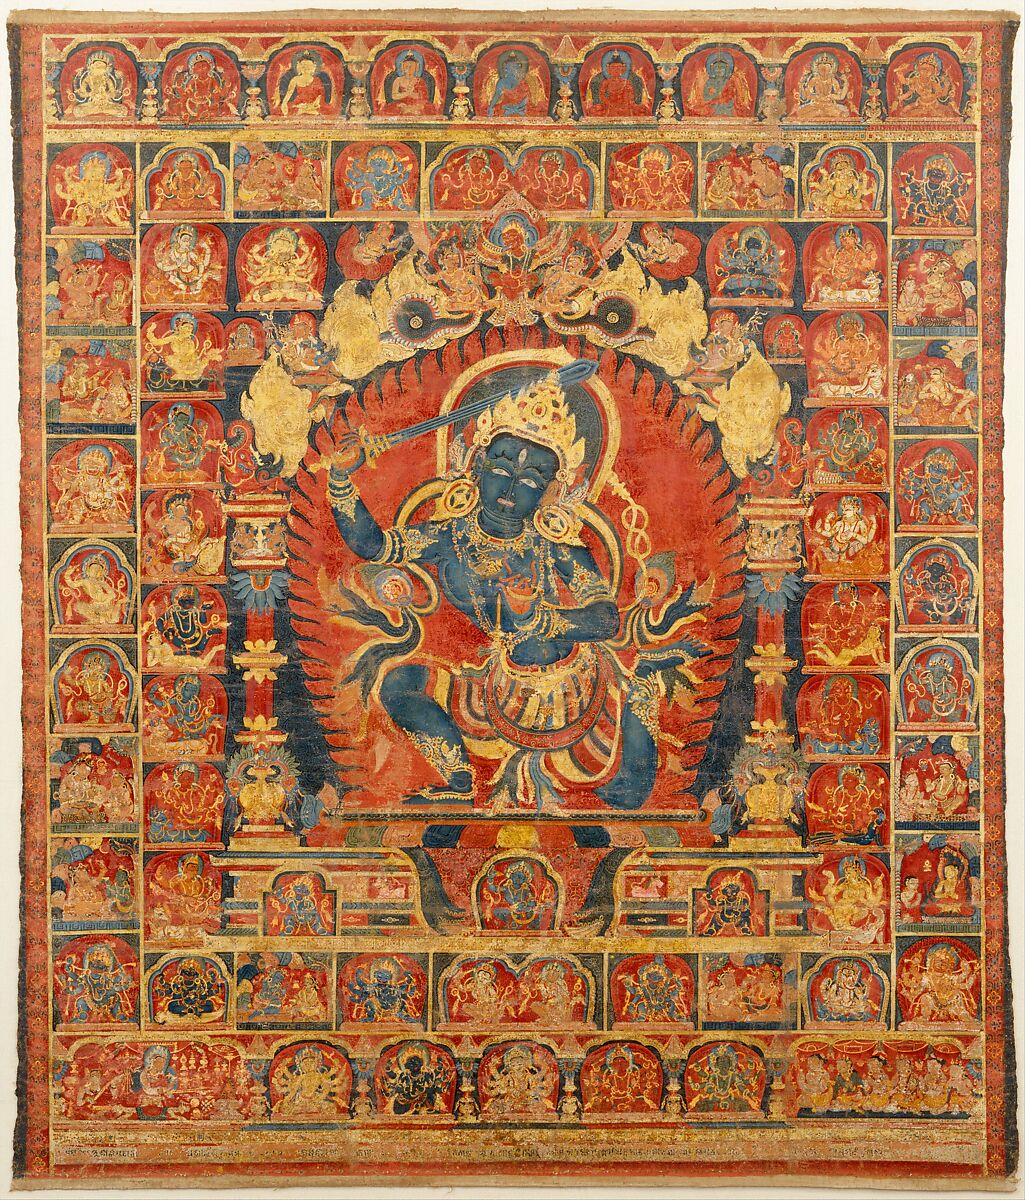 Acala, The Buddhist Protector, Distemper and gold on cloth, Nepal, Kathmandu Valley 